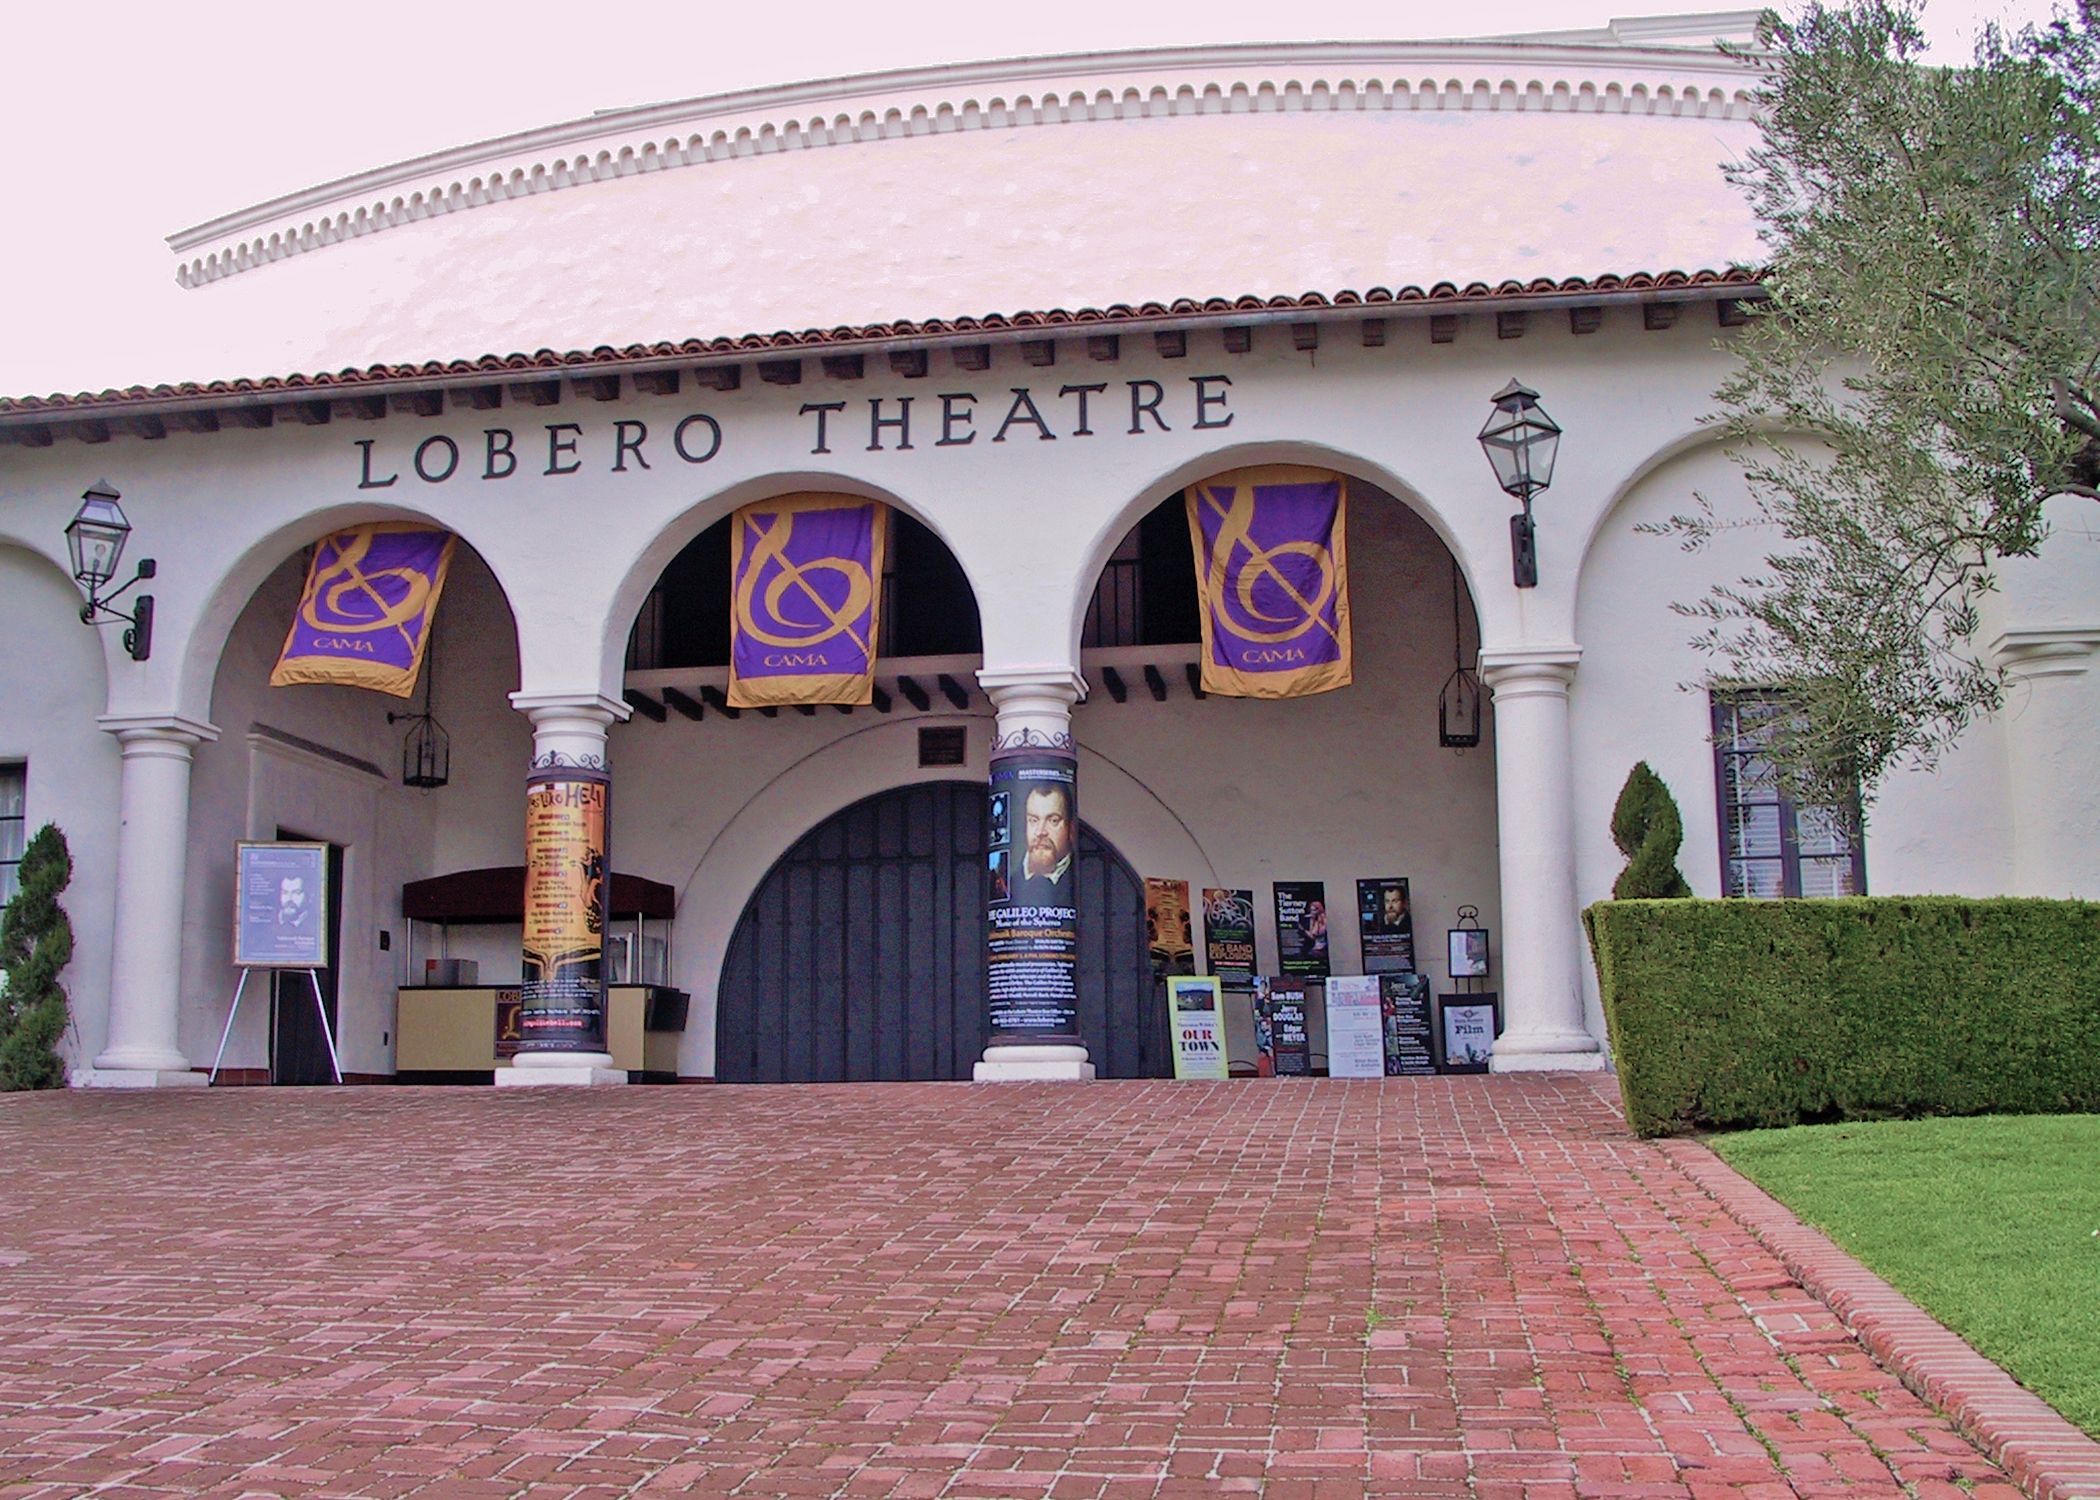 The Spanish Colonial Revival-style facade of the Lobero Theatre in Santa Barbara, with its red tile roof and 3 large arches fronting the large portico.